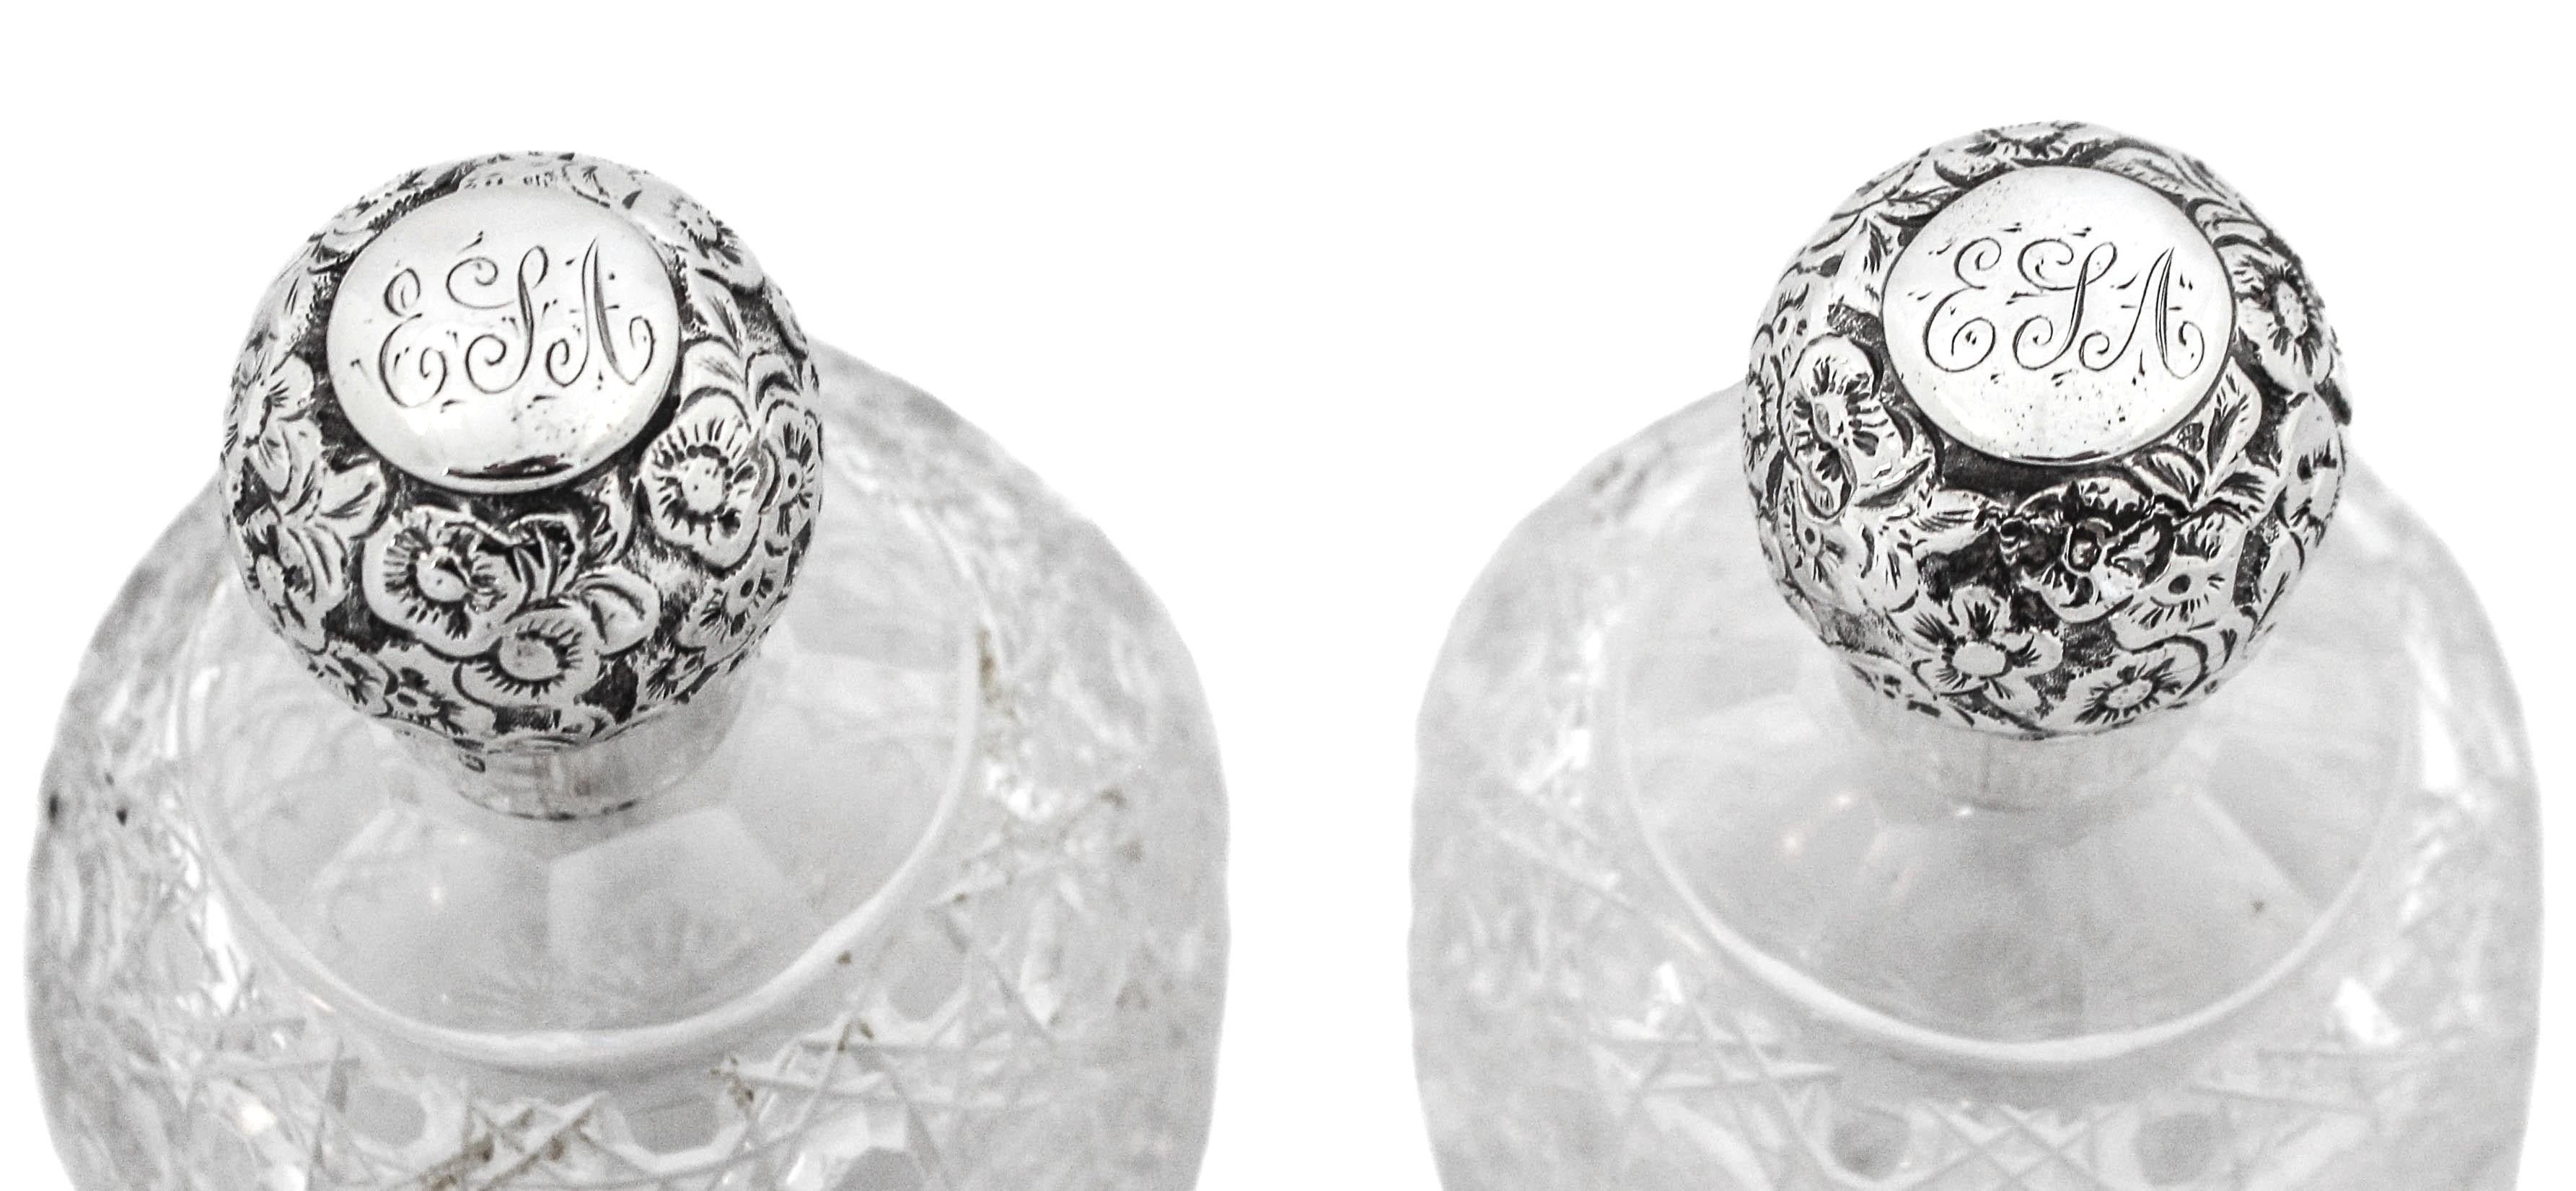 A pair of sterling silver and crystal perfume bottles made in England, circa 1907. Each bottle has an elaborate cut-glass design with sterling silver tops. The sterling top unscrews and has a floral Repousse pattern. These beautiful pieces would